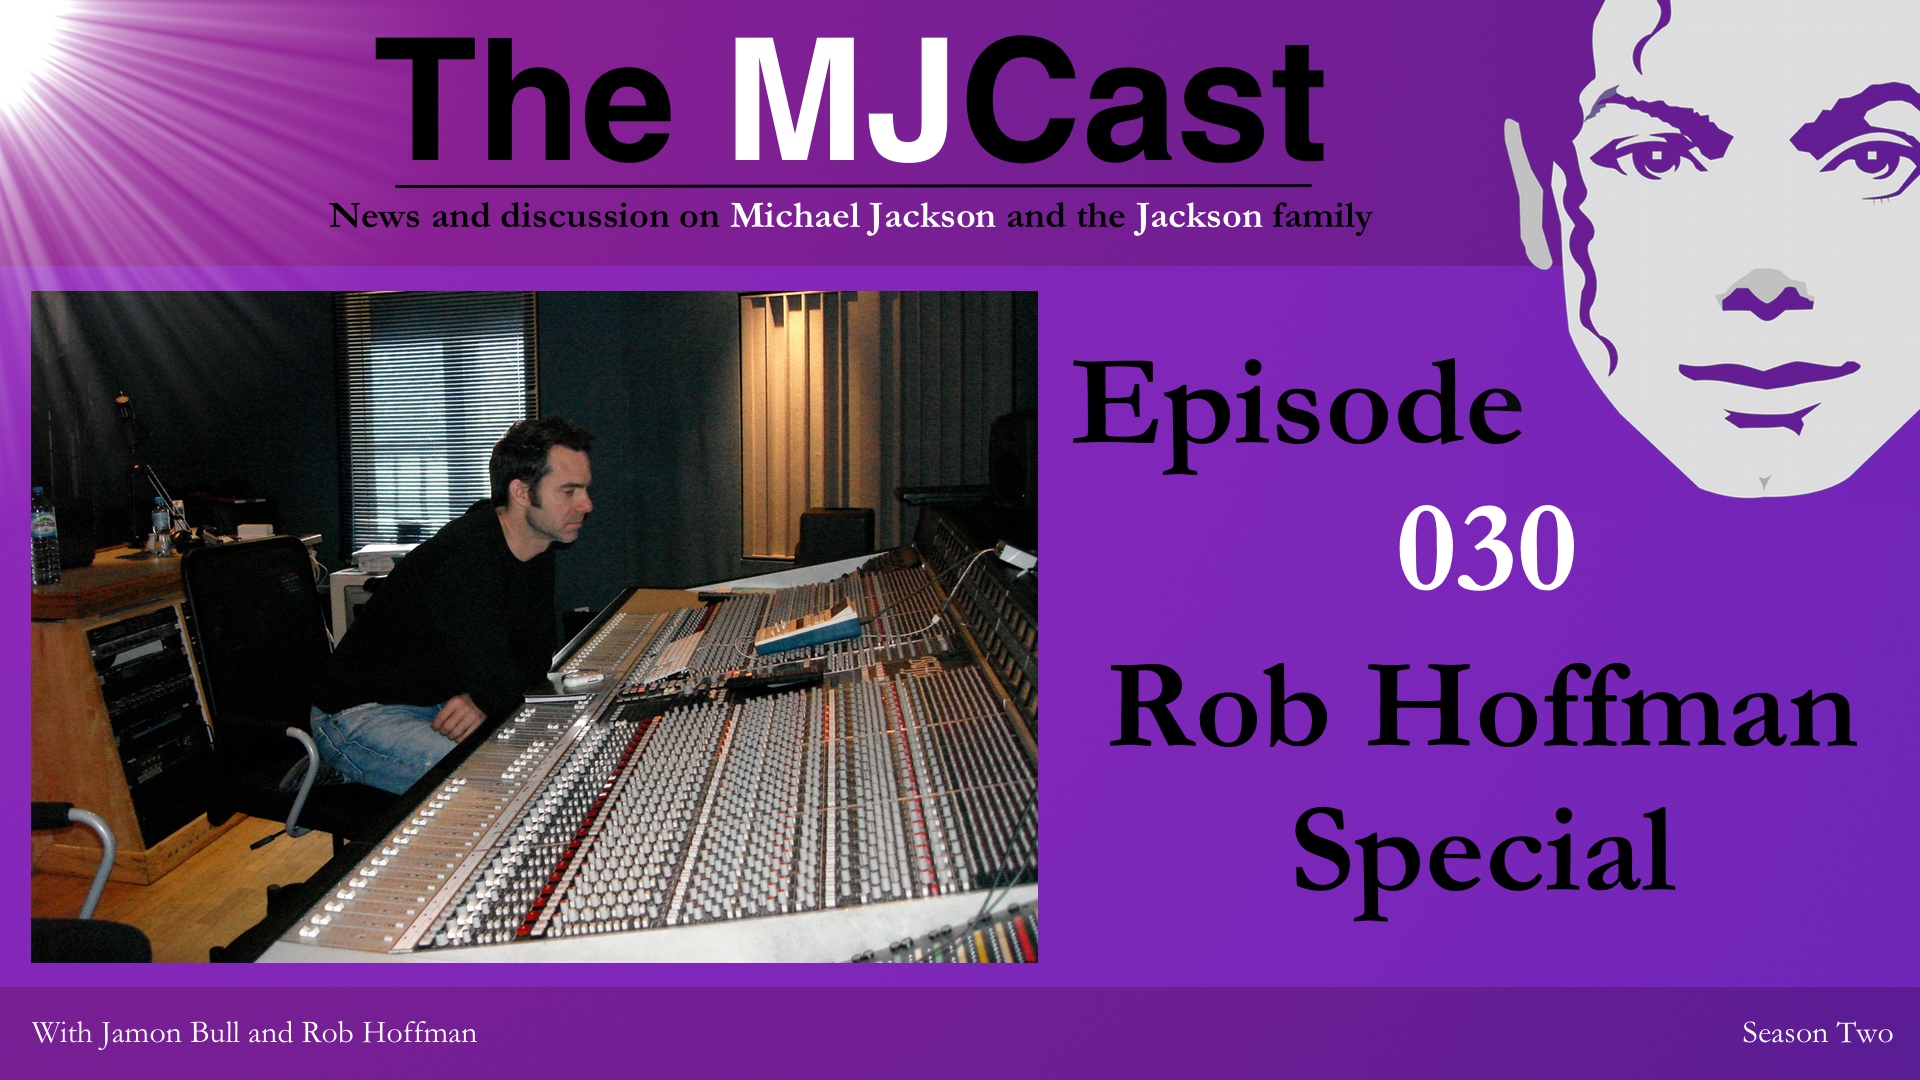 Episode 030 - Rob Hoffman Special YouTube Art 2